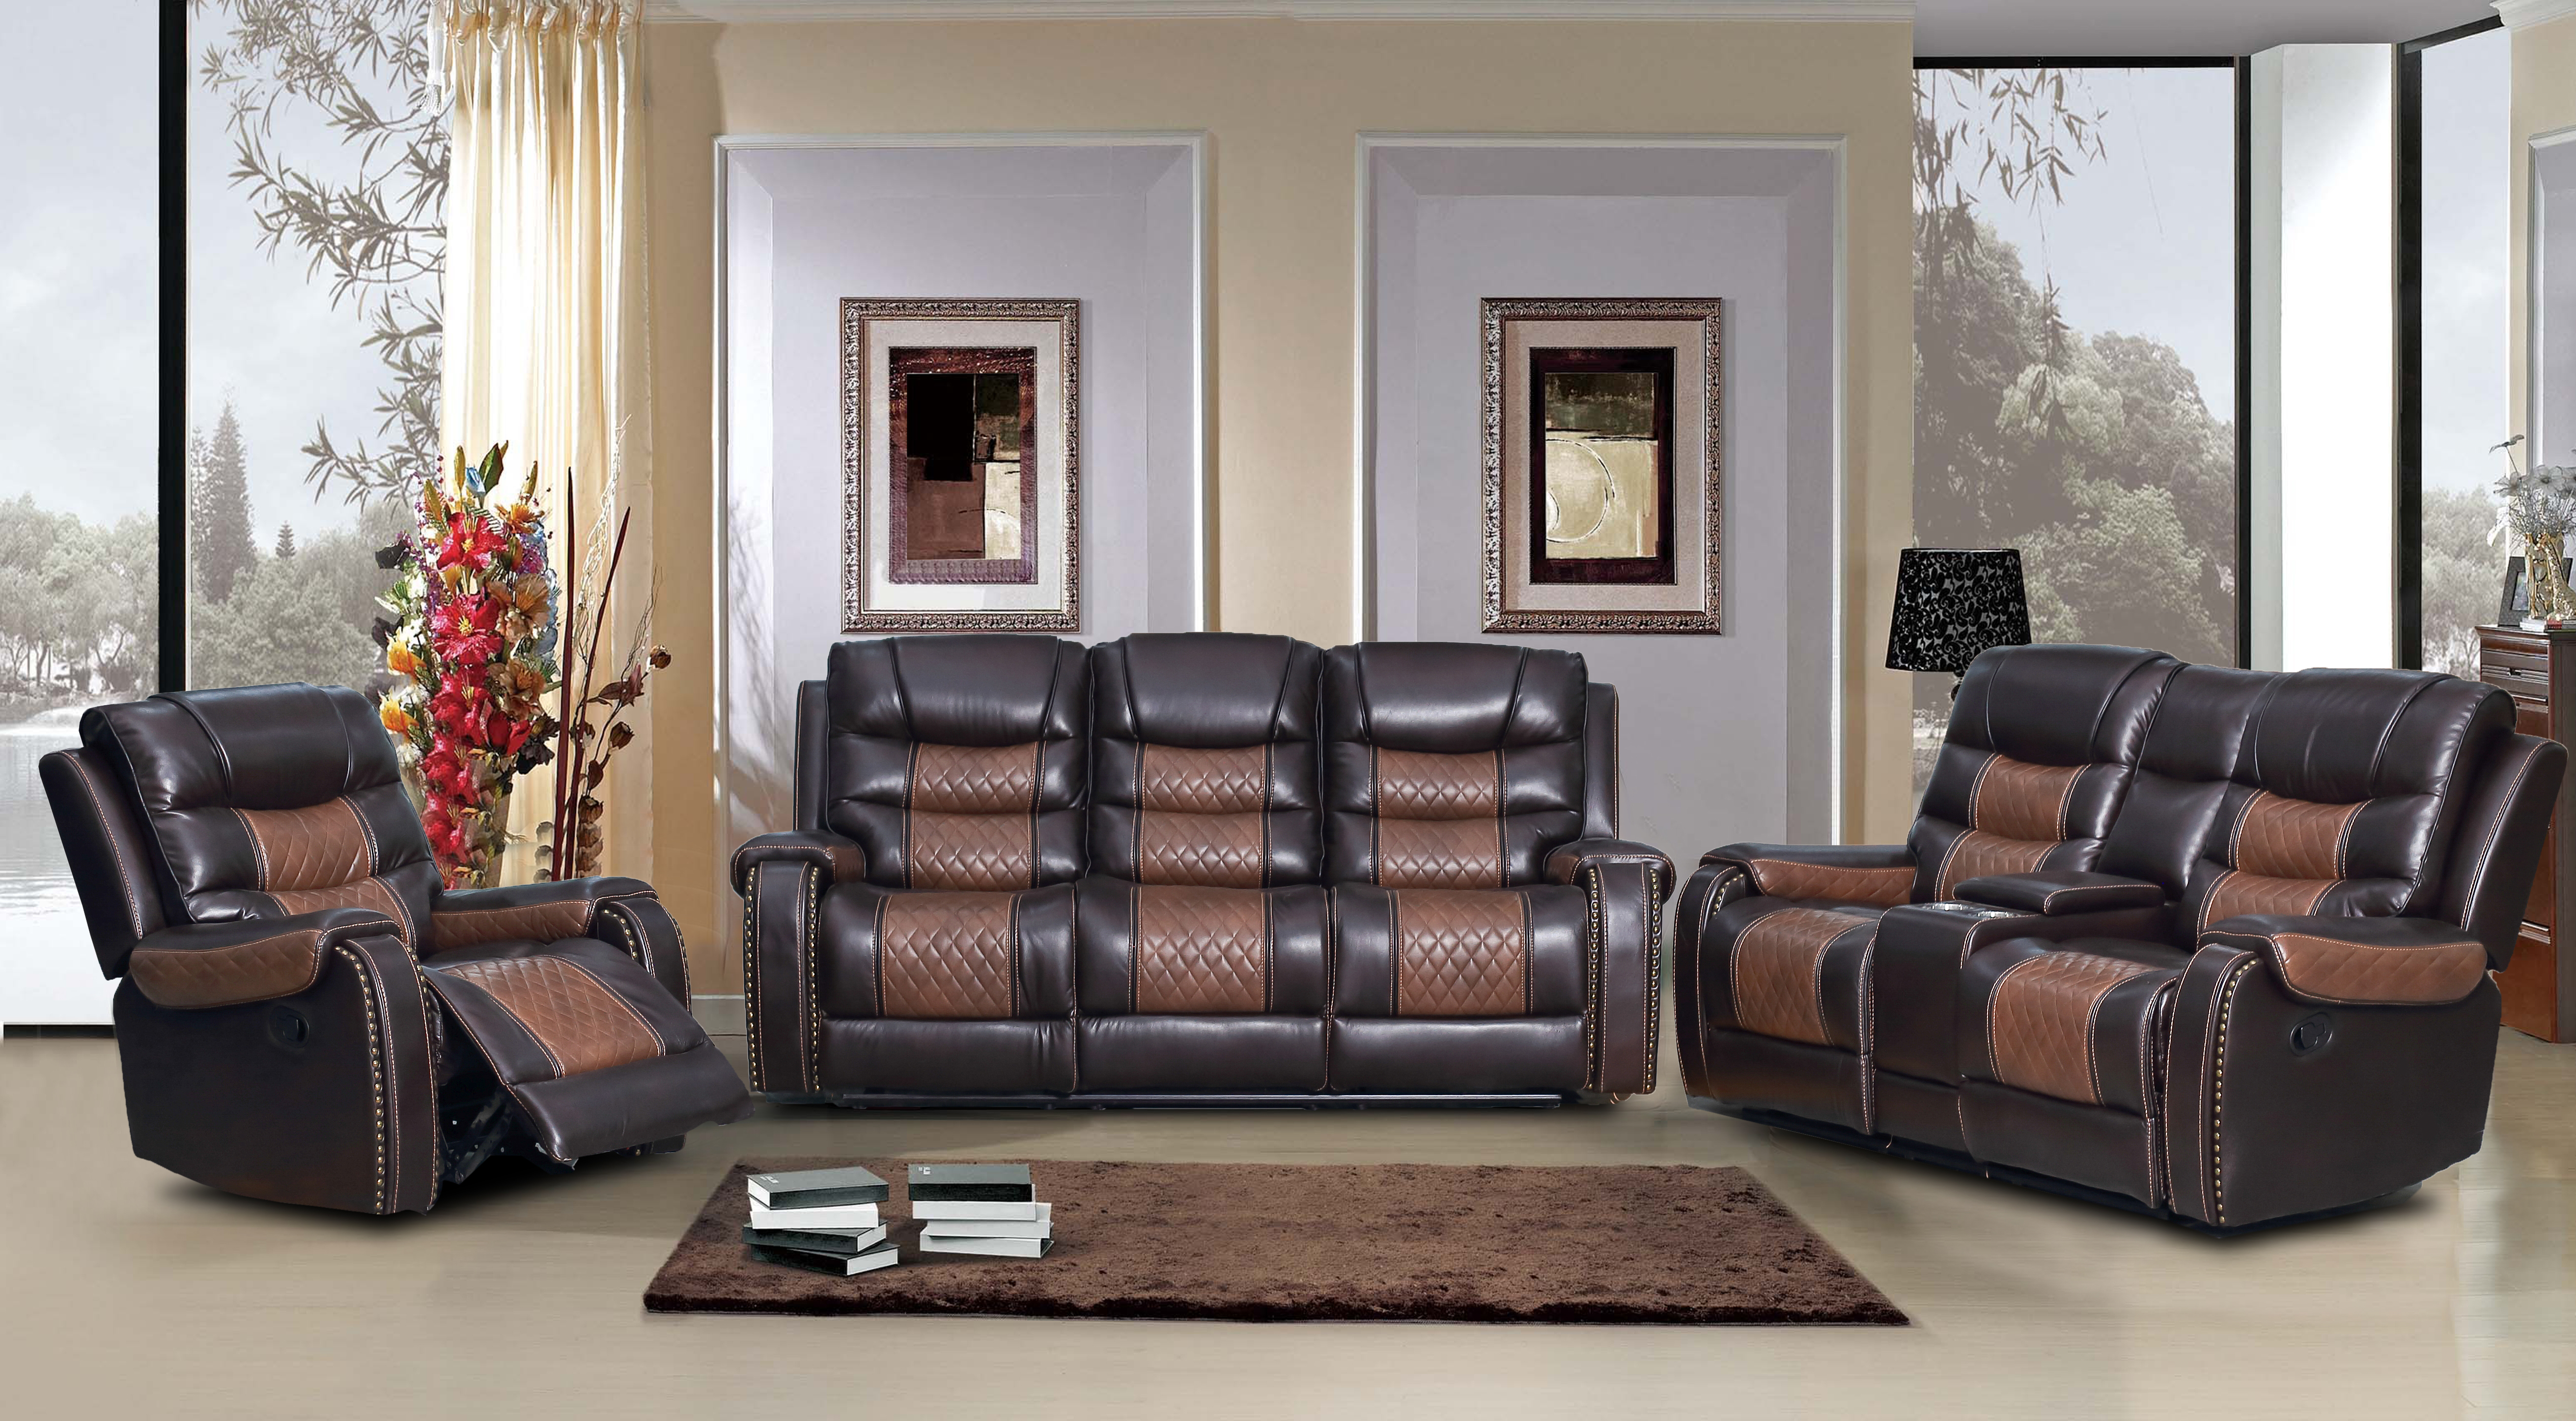 Classic double reclining loveseat bonded leather living room recliner black Brown Leather Double Reclining Loveseat W Console By Ashley Furniture